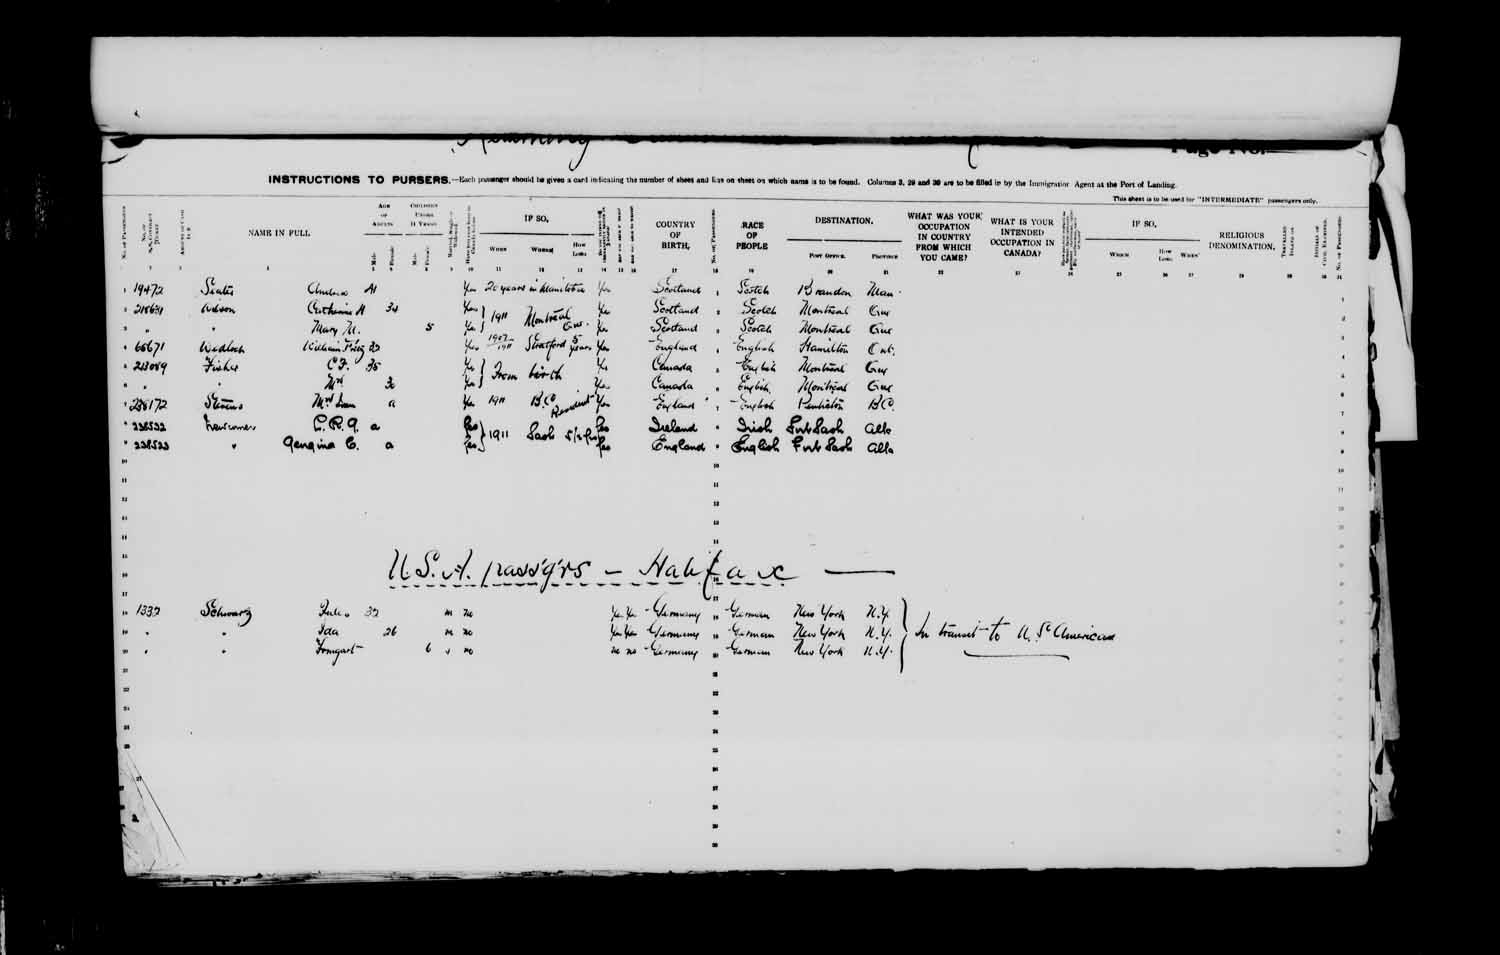 Digitized page of Passenger Lists for Image No.: e003622977